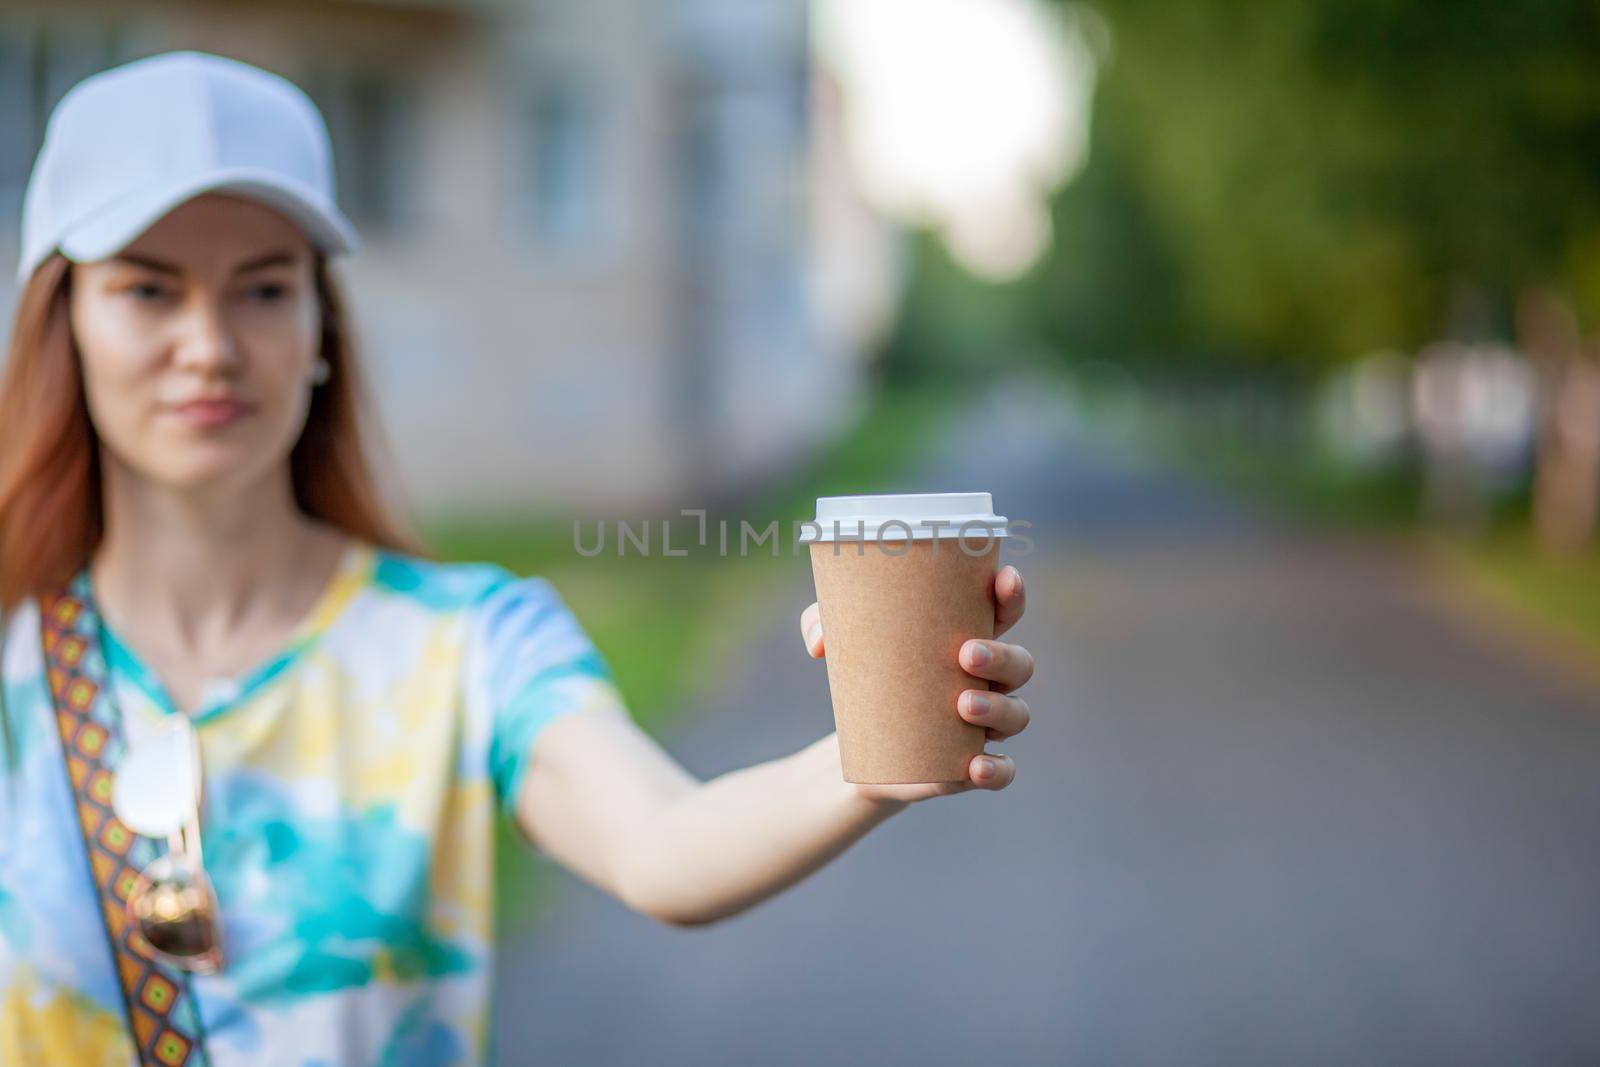 White paper cup with coffee in woman hand. Time for drink coffee in city. Coffee to go. Enjoy moment, take a break. Disposable paper cup closeup. Delicious hot beverage. Blank space for text, mockup